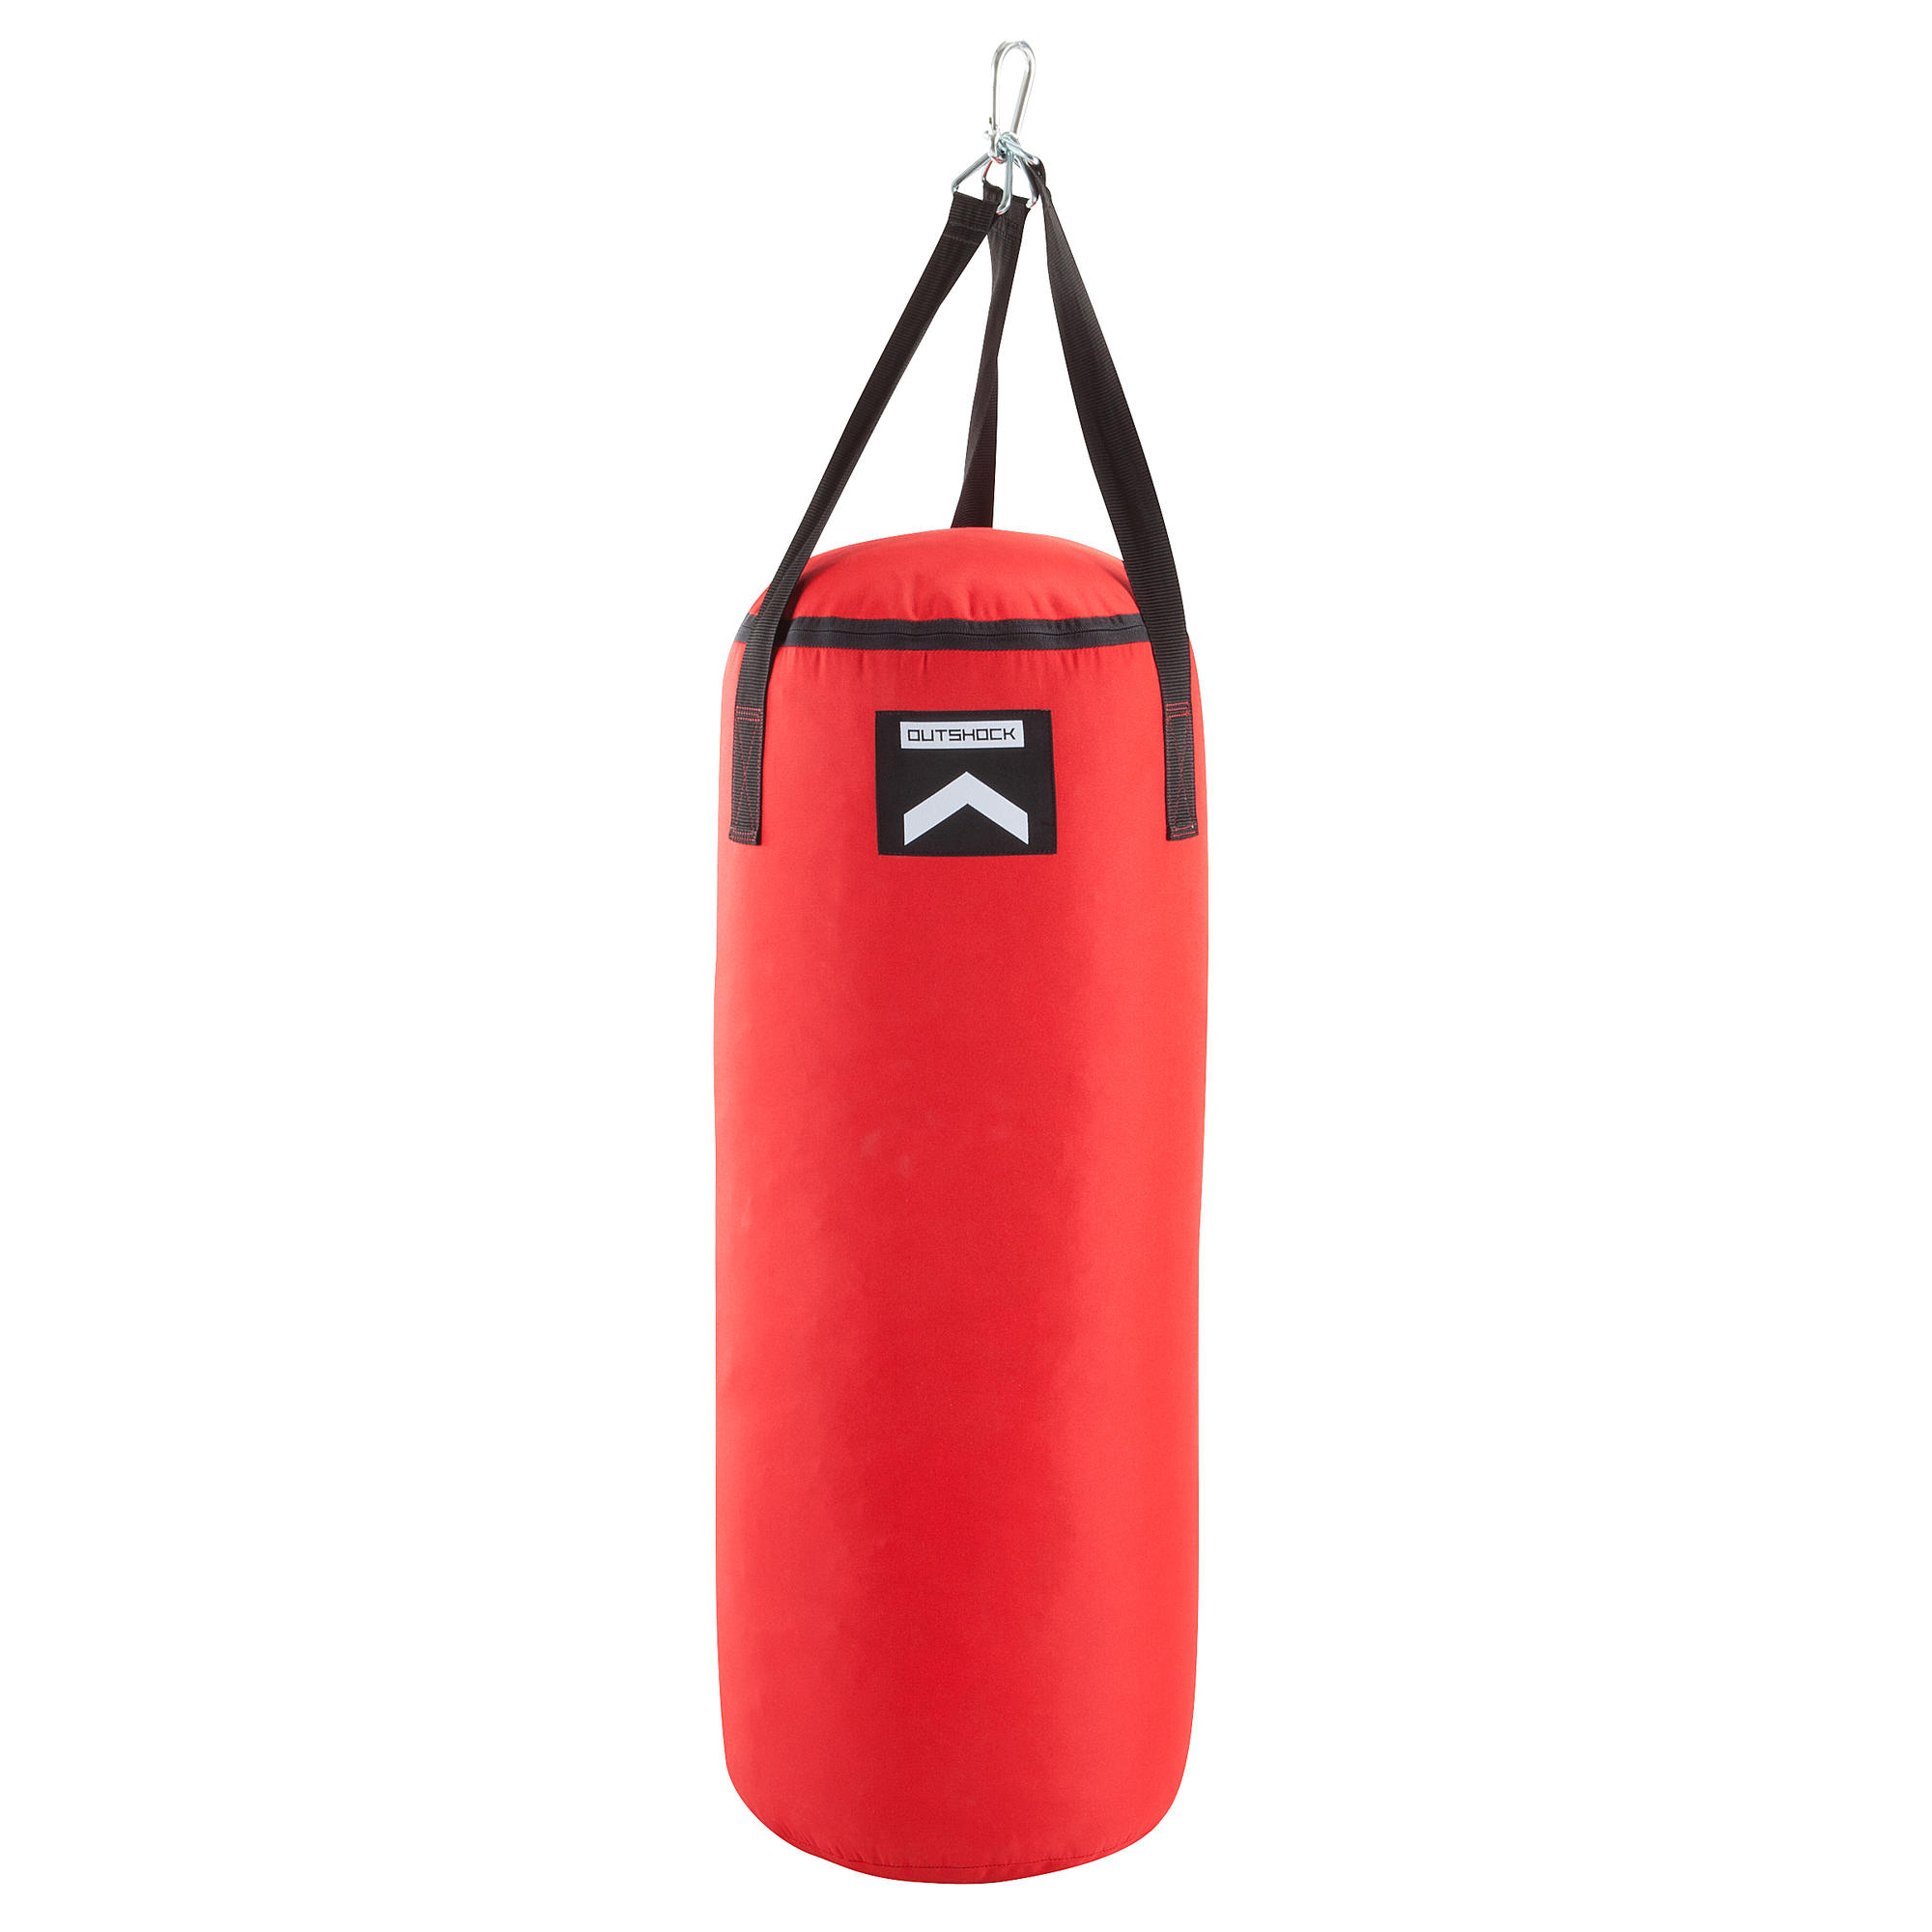 PB 850 Punch Bag - Red | Domyos by 